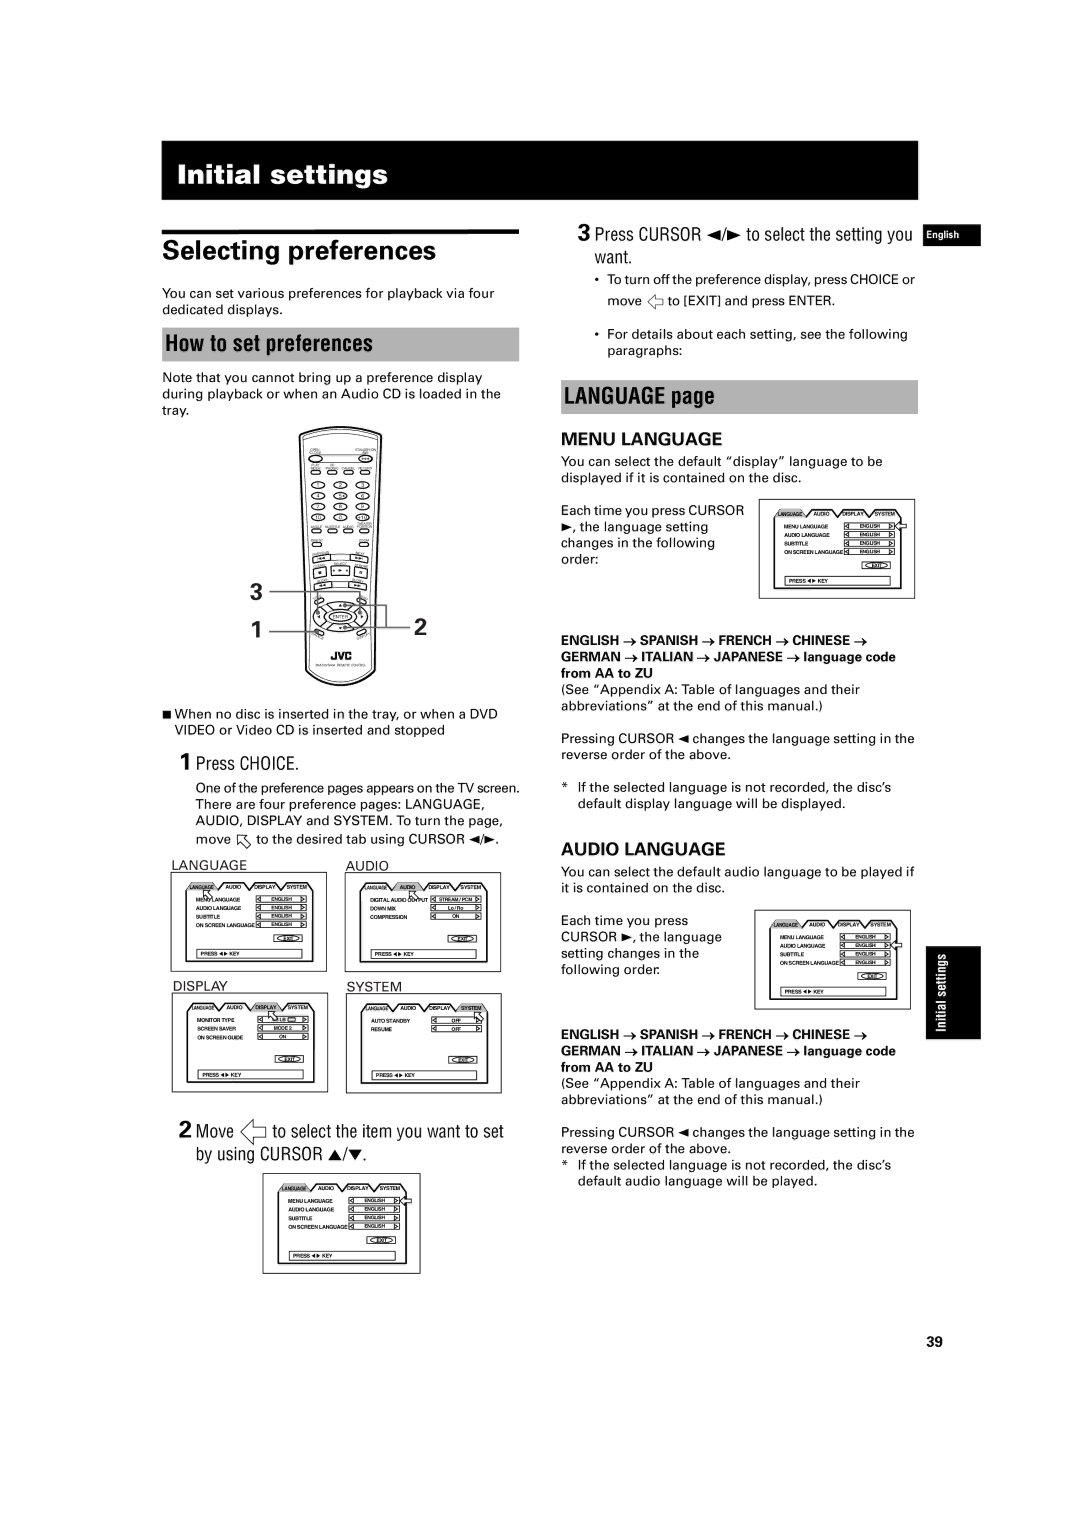 JVC XV-S200 manual Initial settings, Selecting preferences, How to set preferences, Language, Press Choice 